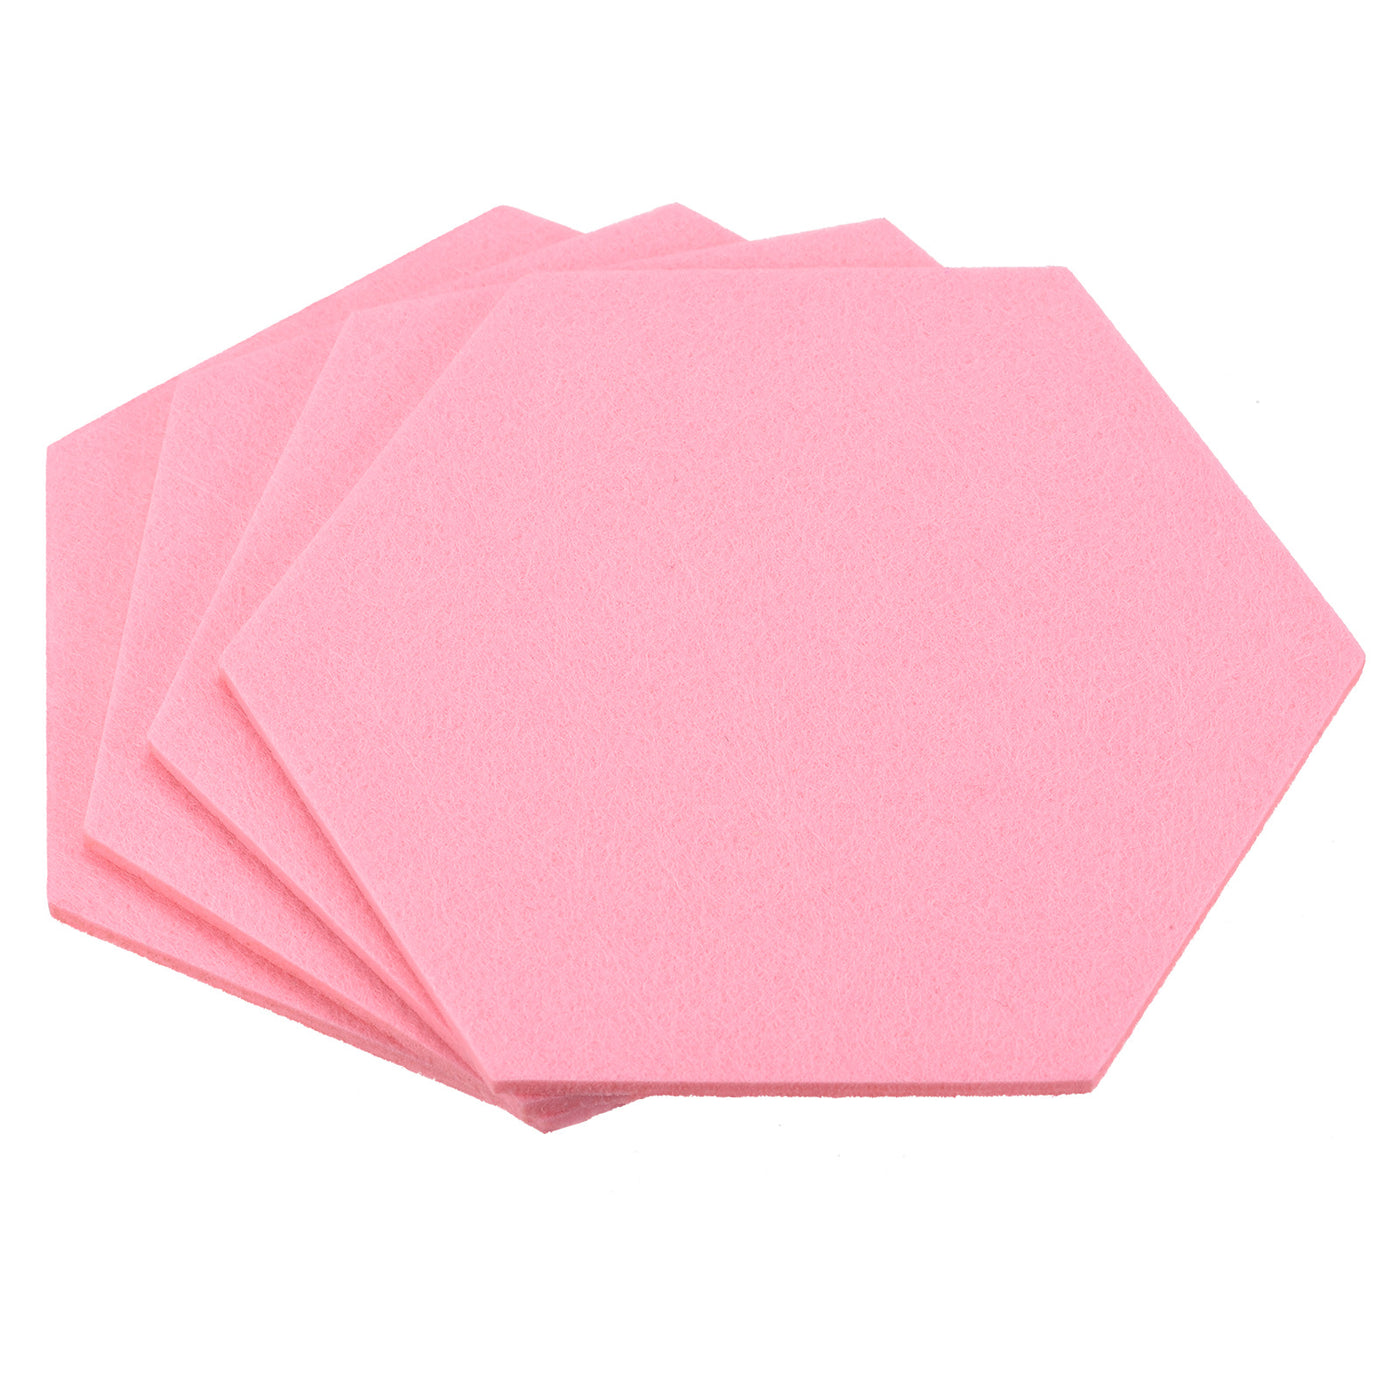 uxcell Uxcell Felt Coasters 4pcs Absorbent Pad Coaster for Drink Cup Pot Bowl Vase Pink